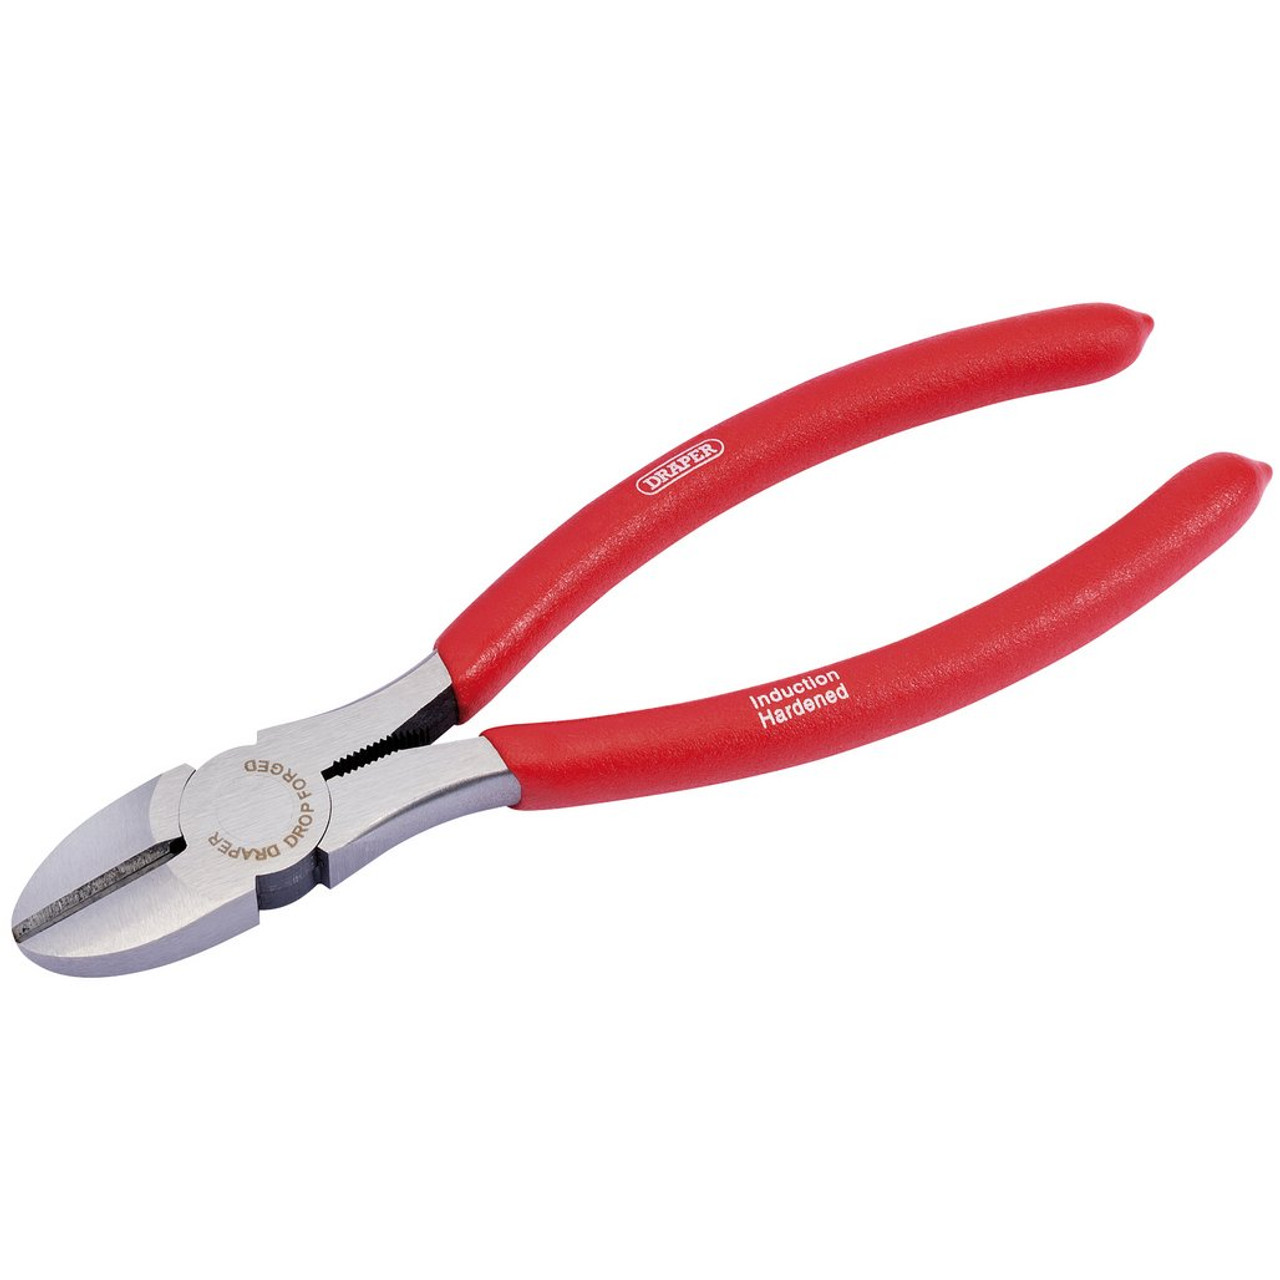 68246 Draper 190mm Diagonal Side Cutter Pliers With PVC Dipped Handles 